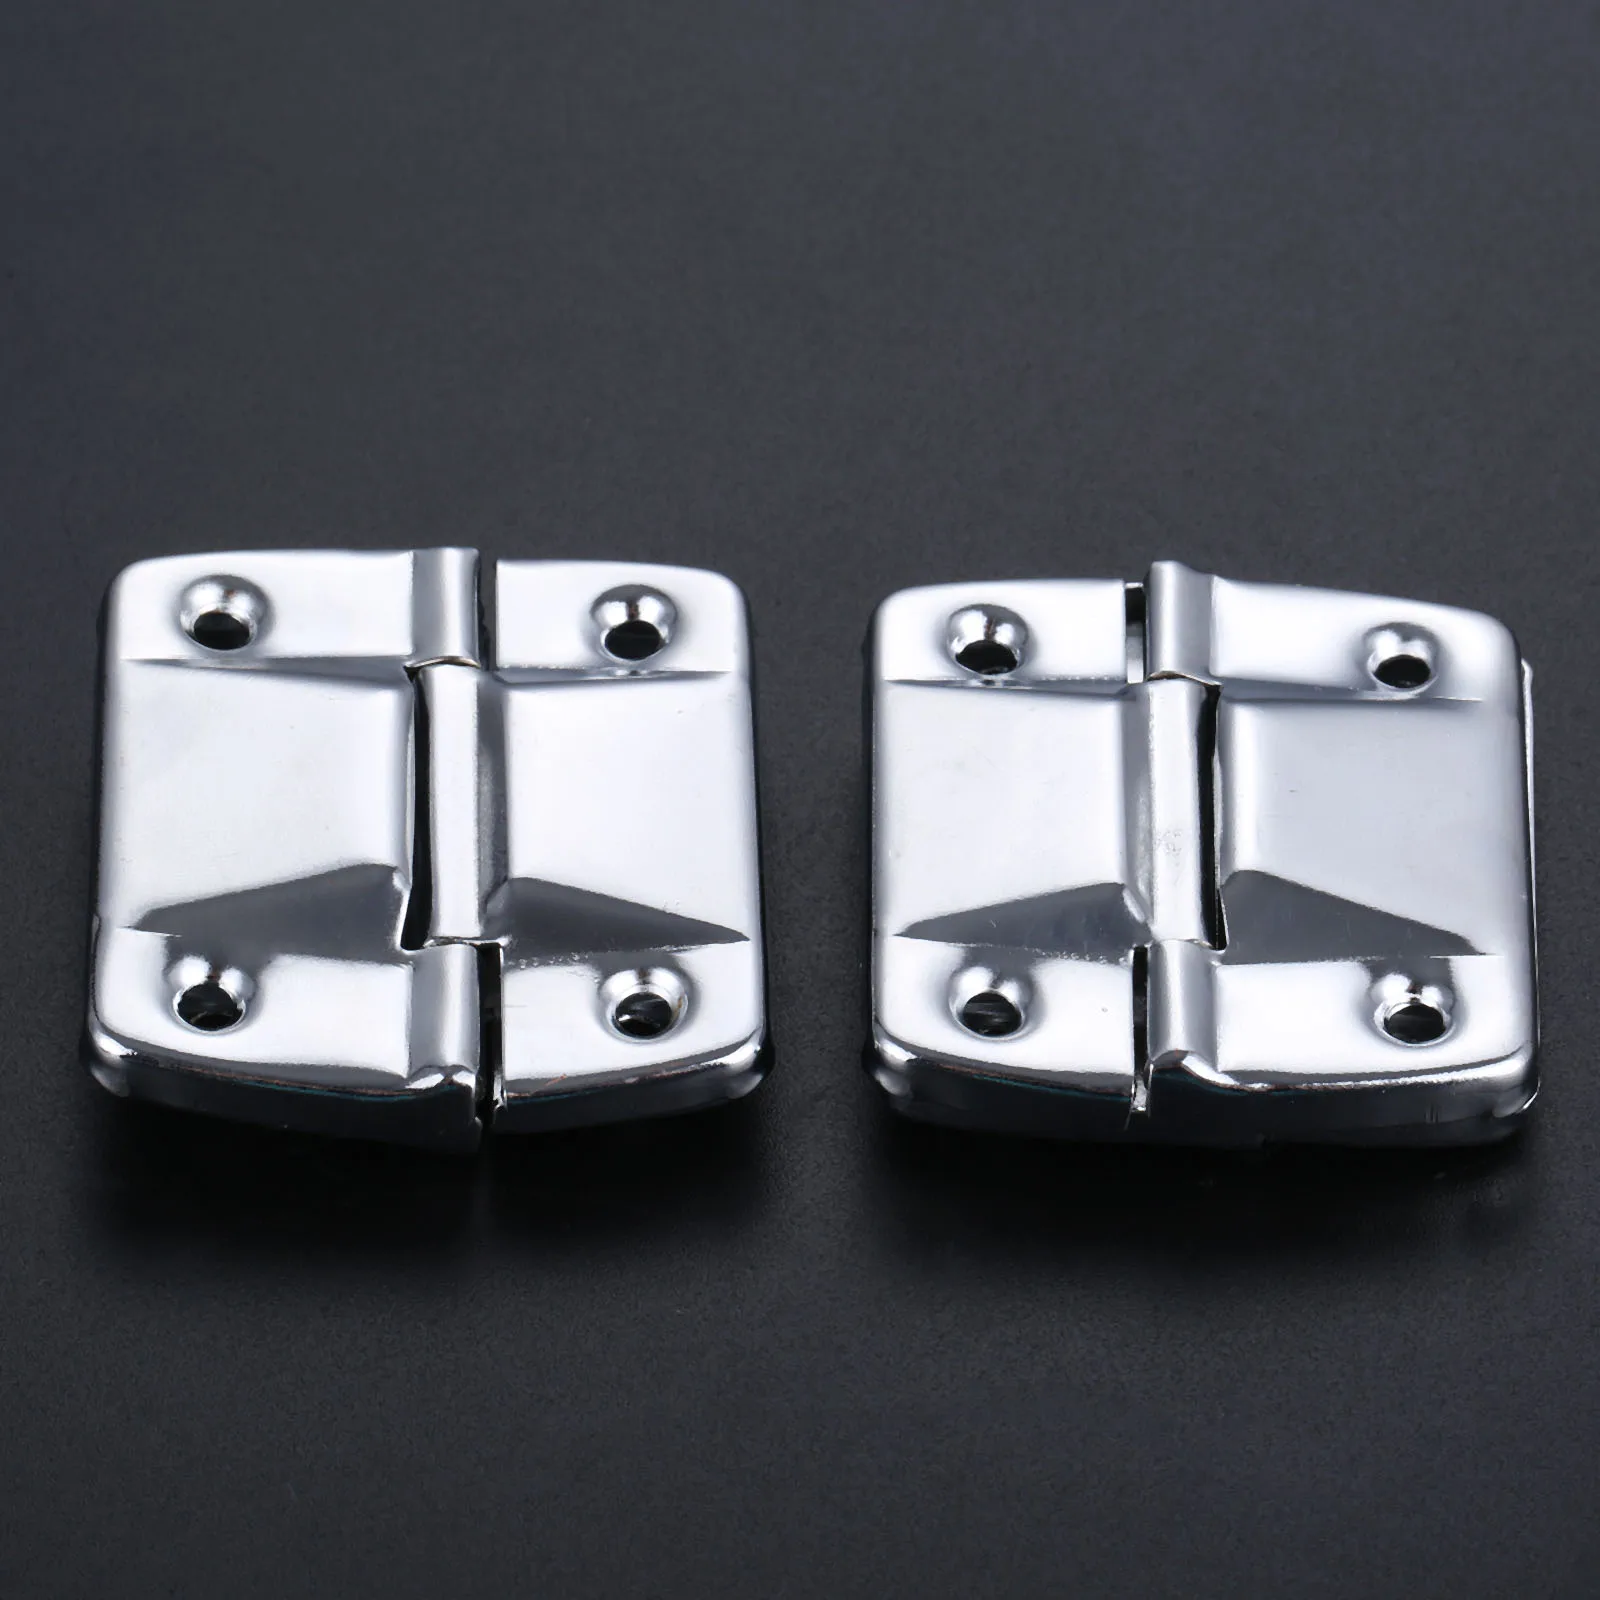 2pcs/pair Metal Support Hinge Flight Case Jewel Wood Box Luggage Positioning 51*47mm Toolbox Suitcase Luggage Folding Fittings images - 6